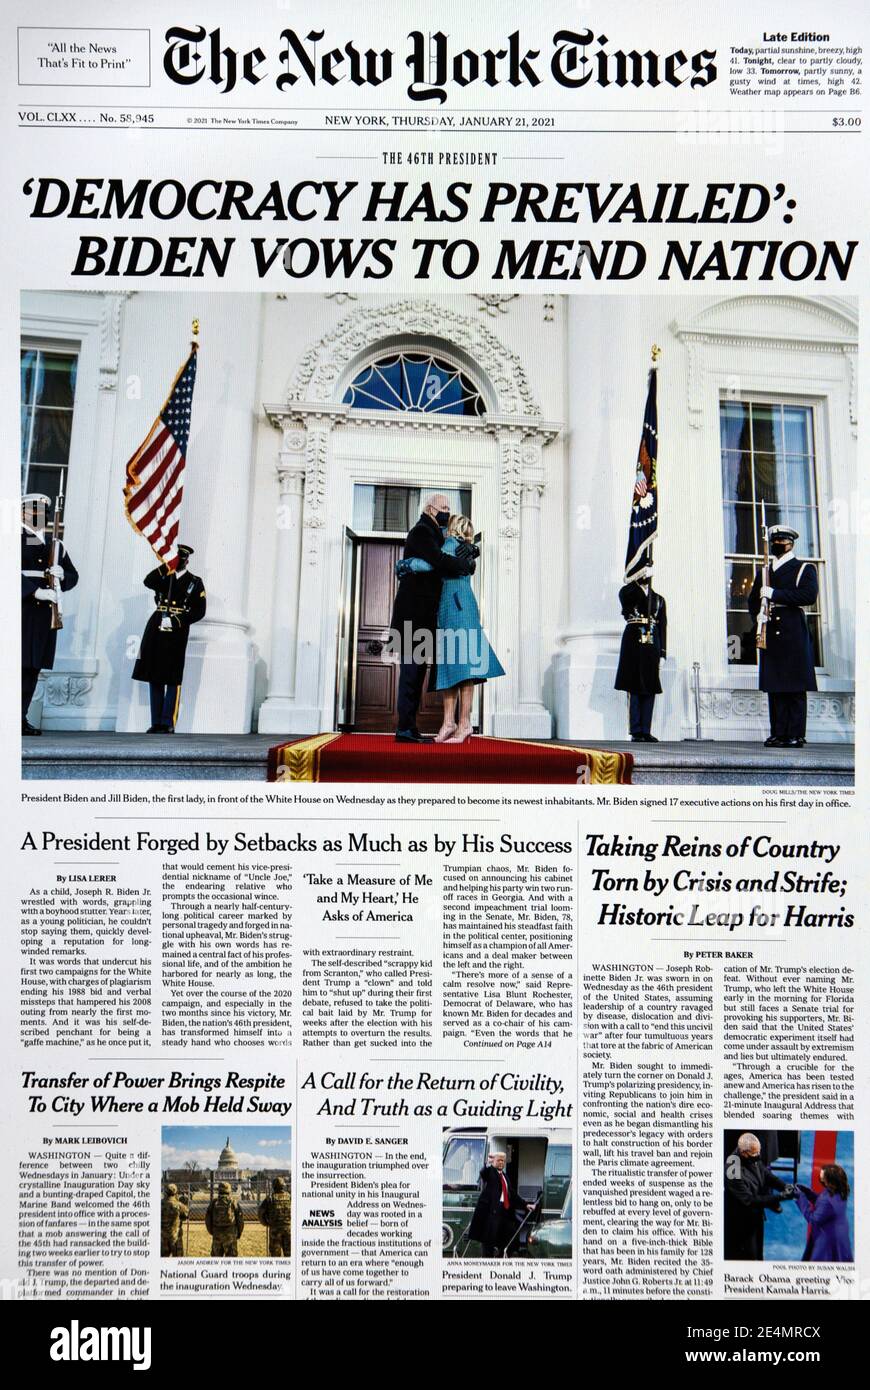 The front page of The New York Times following the inauguration of Joe Biden as U.S. President. Stock Photo